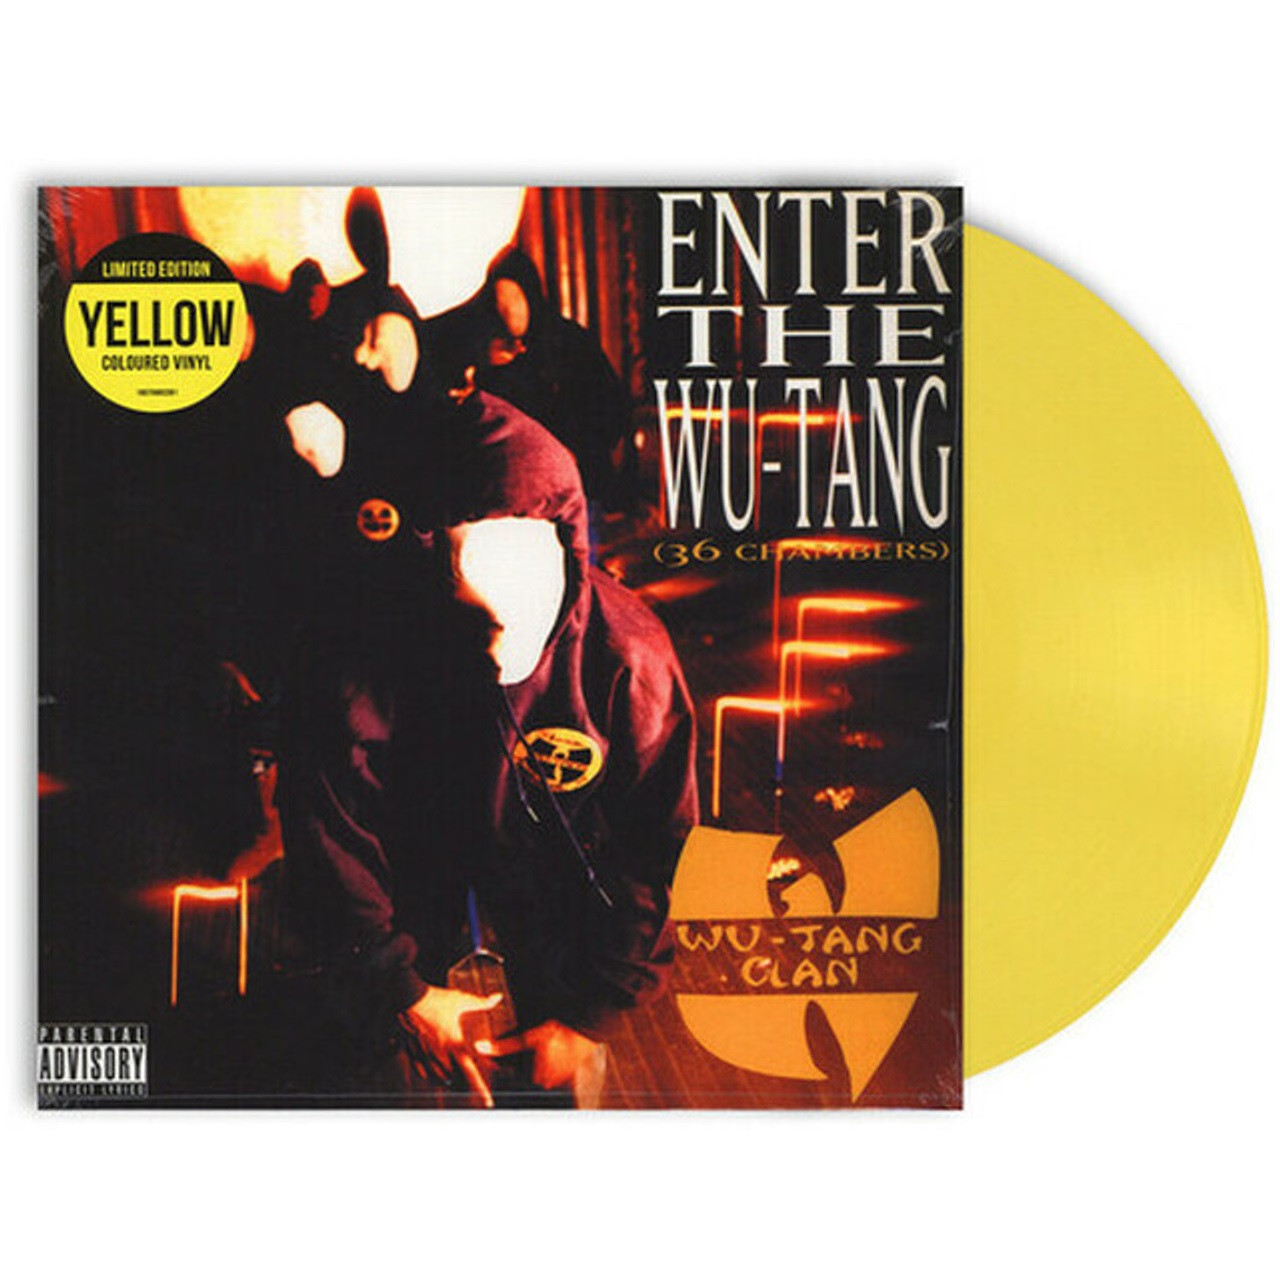 Wu-Tang Clan ‎– Back In The Game Vinyl 12 4 Tracks EP Promo Only 2002 NEW